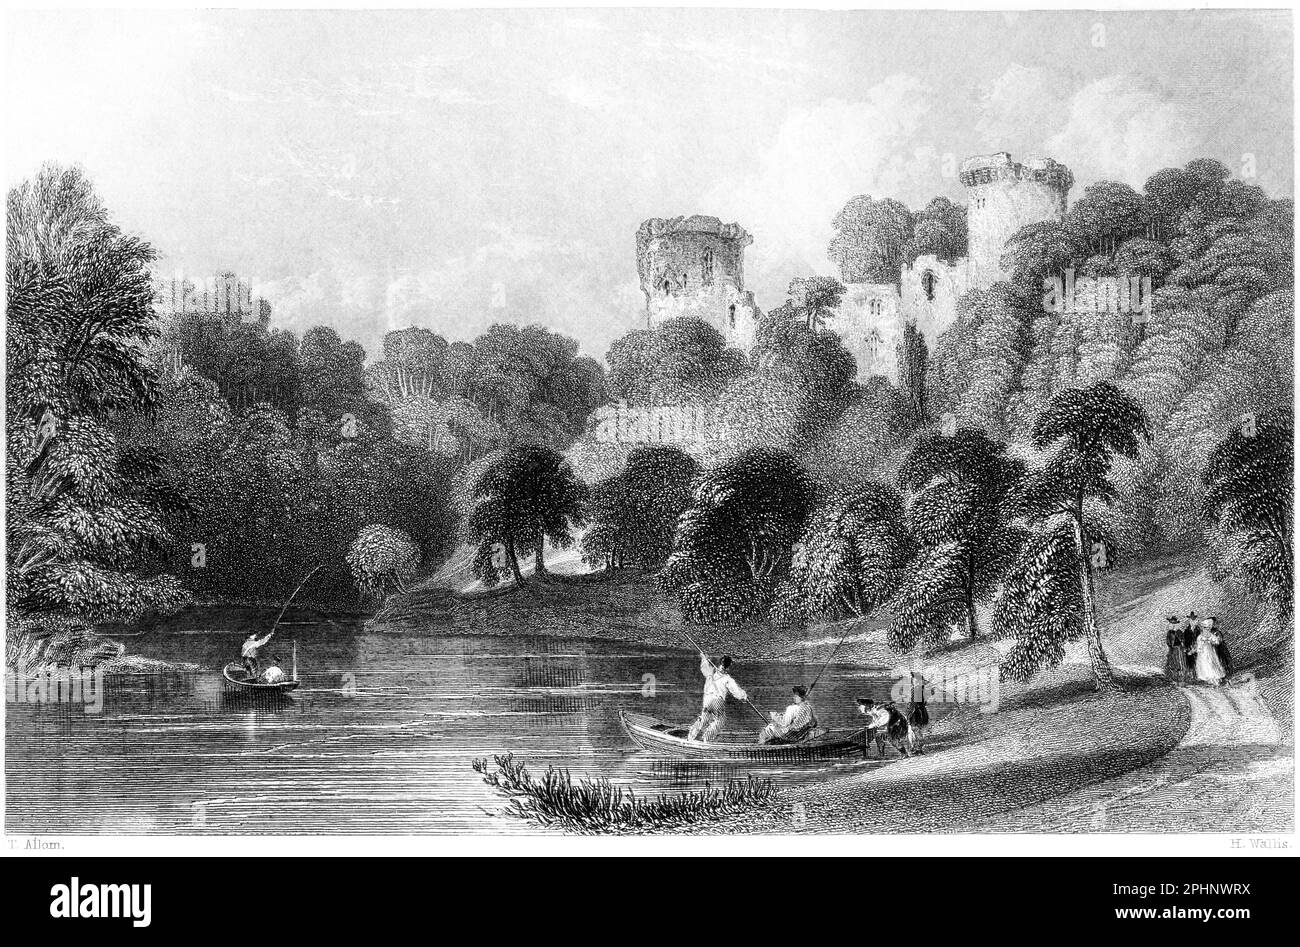 An engraving of Bothwell Castle on the Clyde, Lanarkshire, Scotland UK scanned at high resolution from a book printed in 1840. Stock Photo